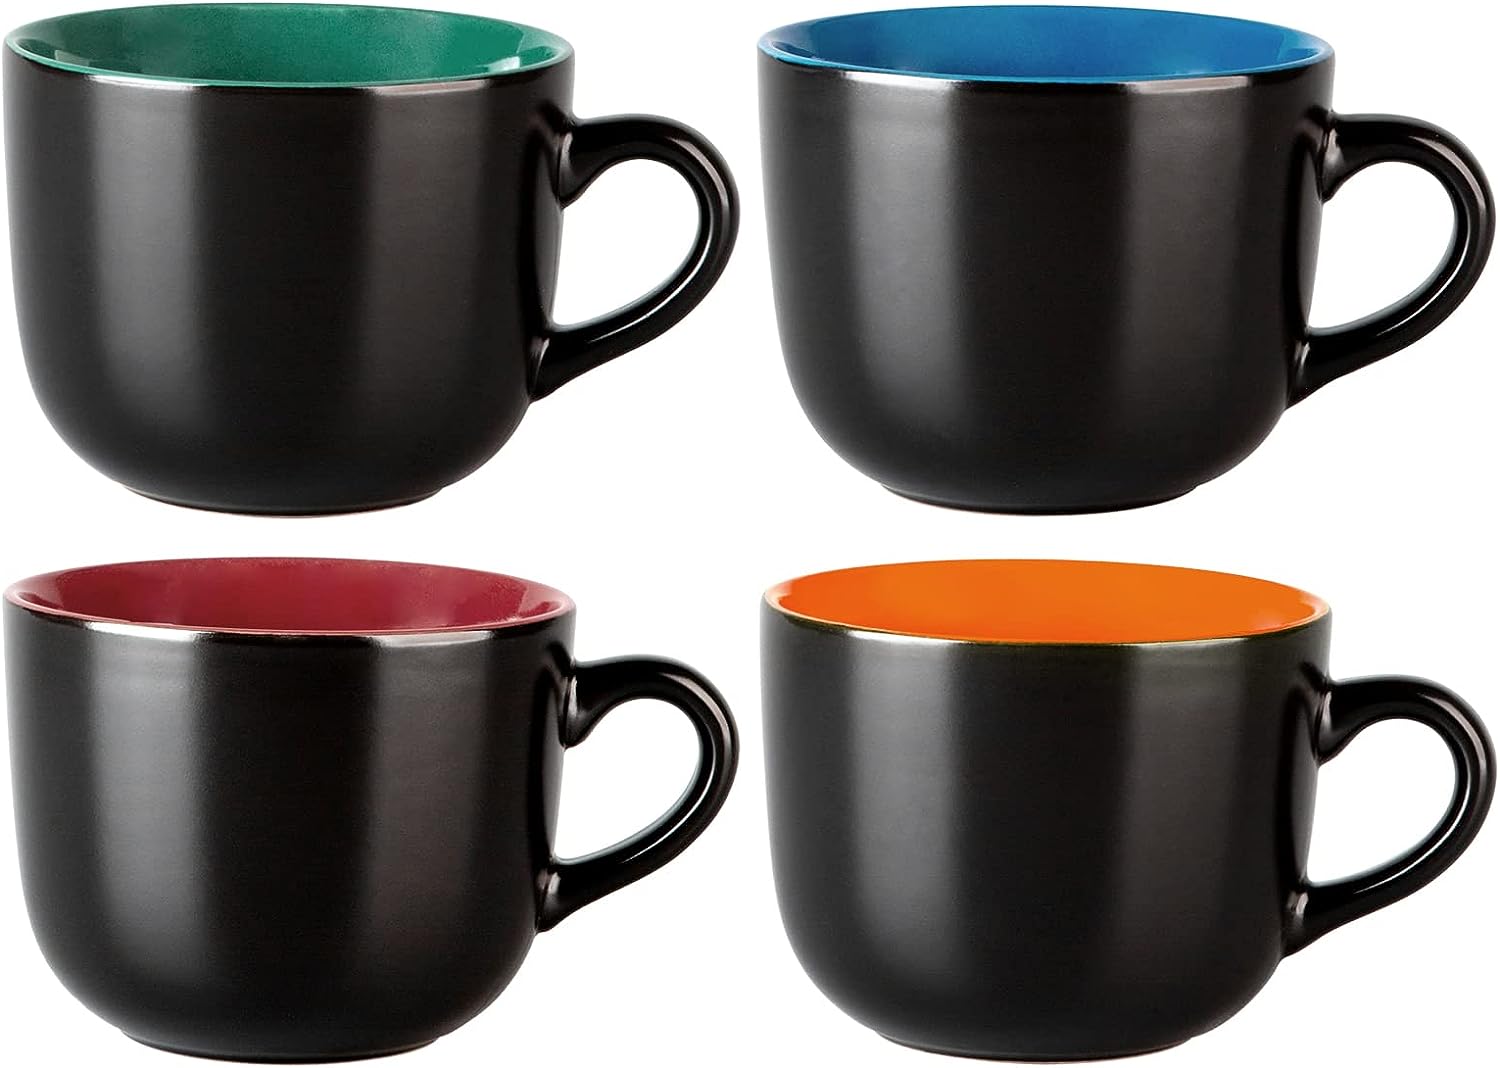 Coffee Mugs Set Of 4 - 12 Oz Ceramic Coffee Cup With Large Handle